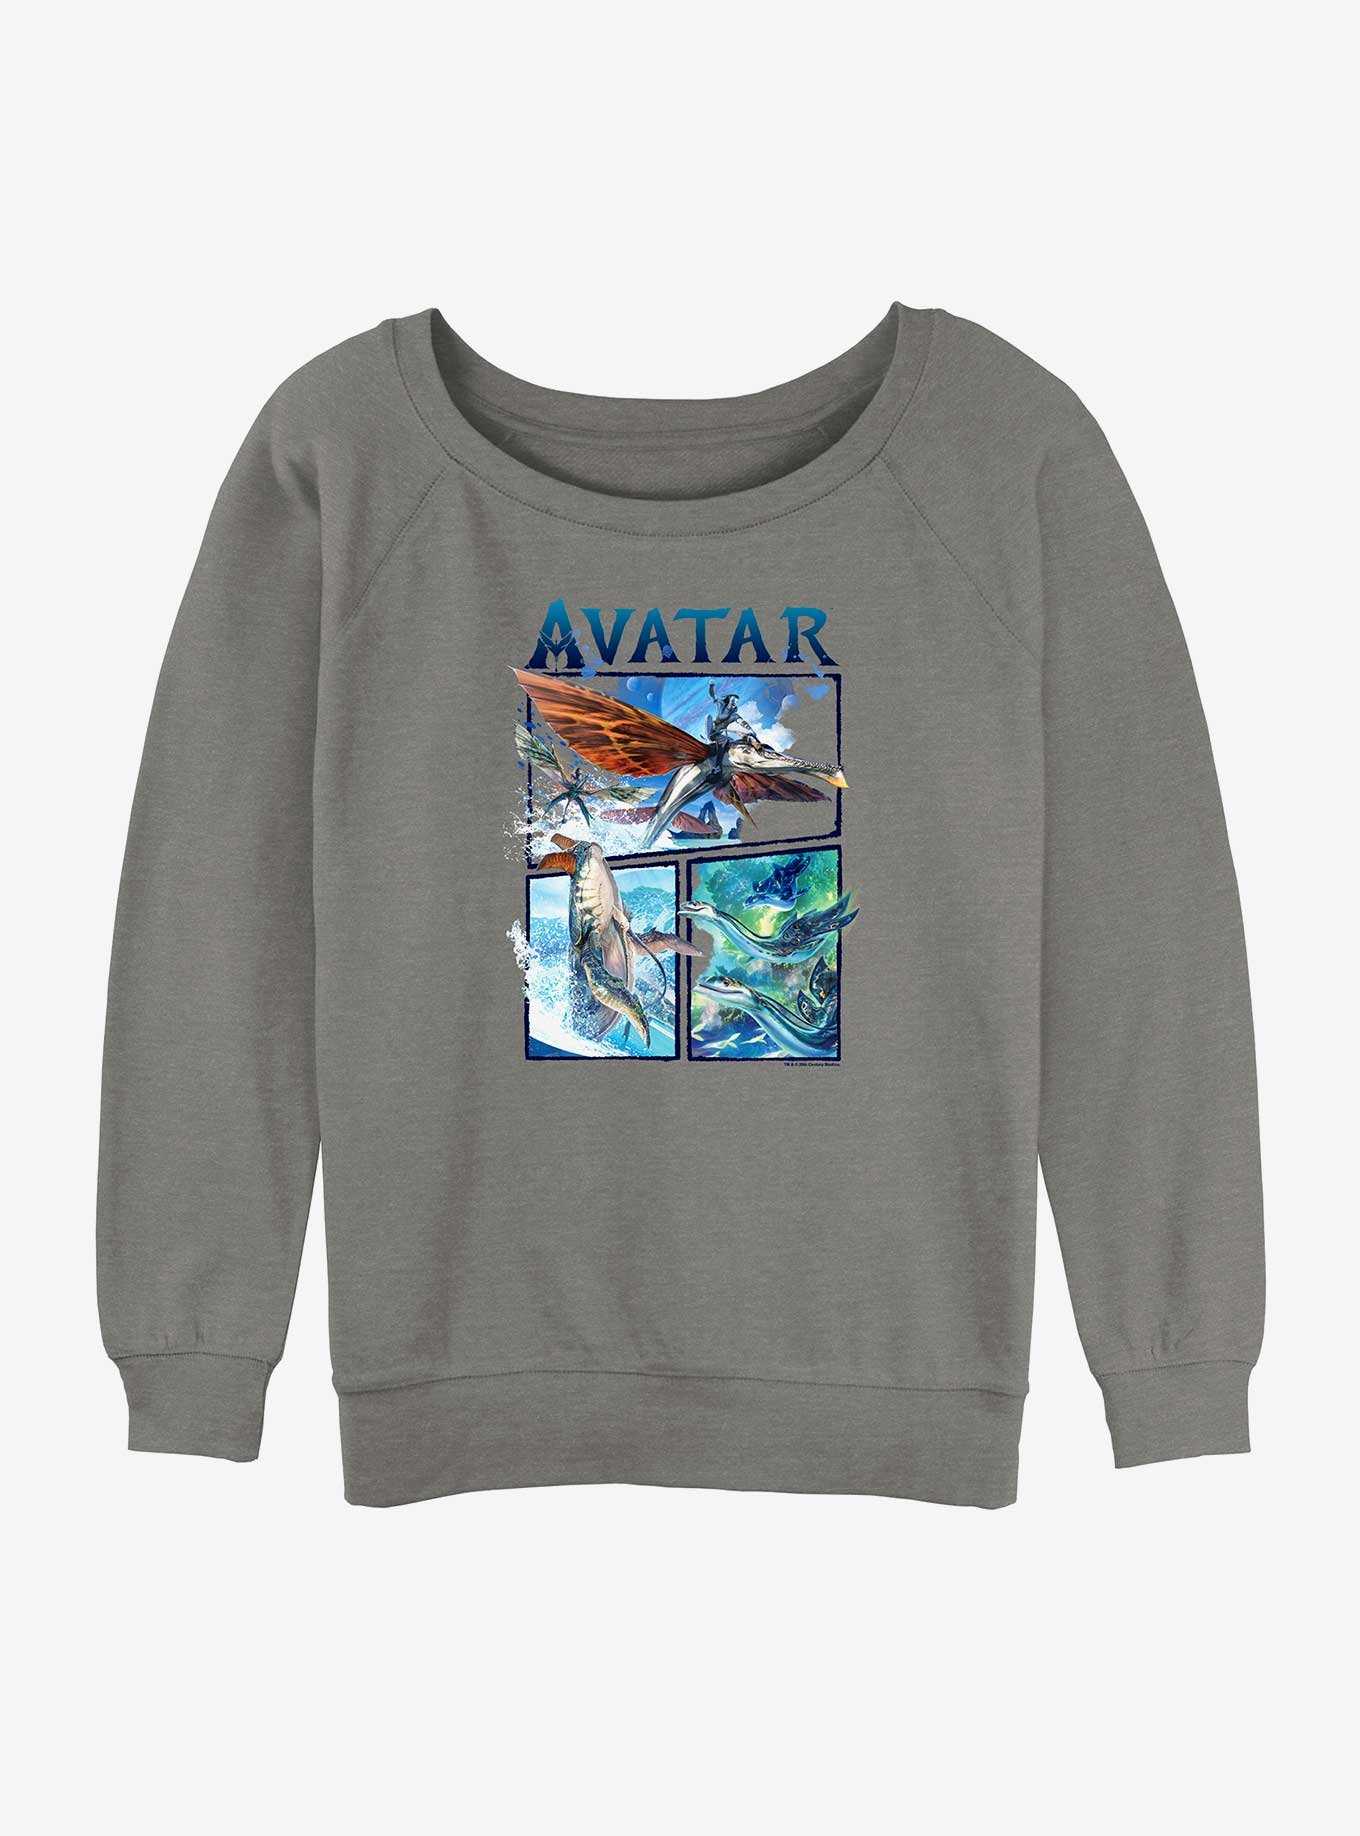 Avatar: The Way of Water Air and Sea Girls Slouchy Sweatshirt, , hi-res